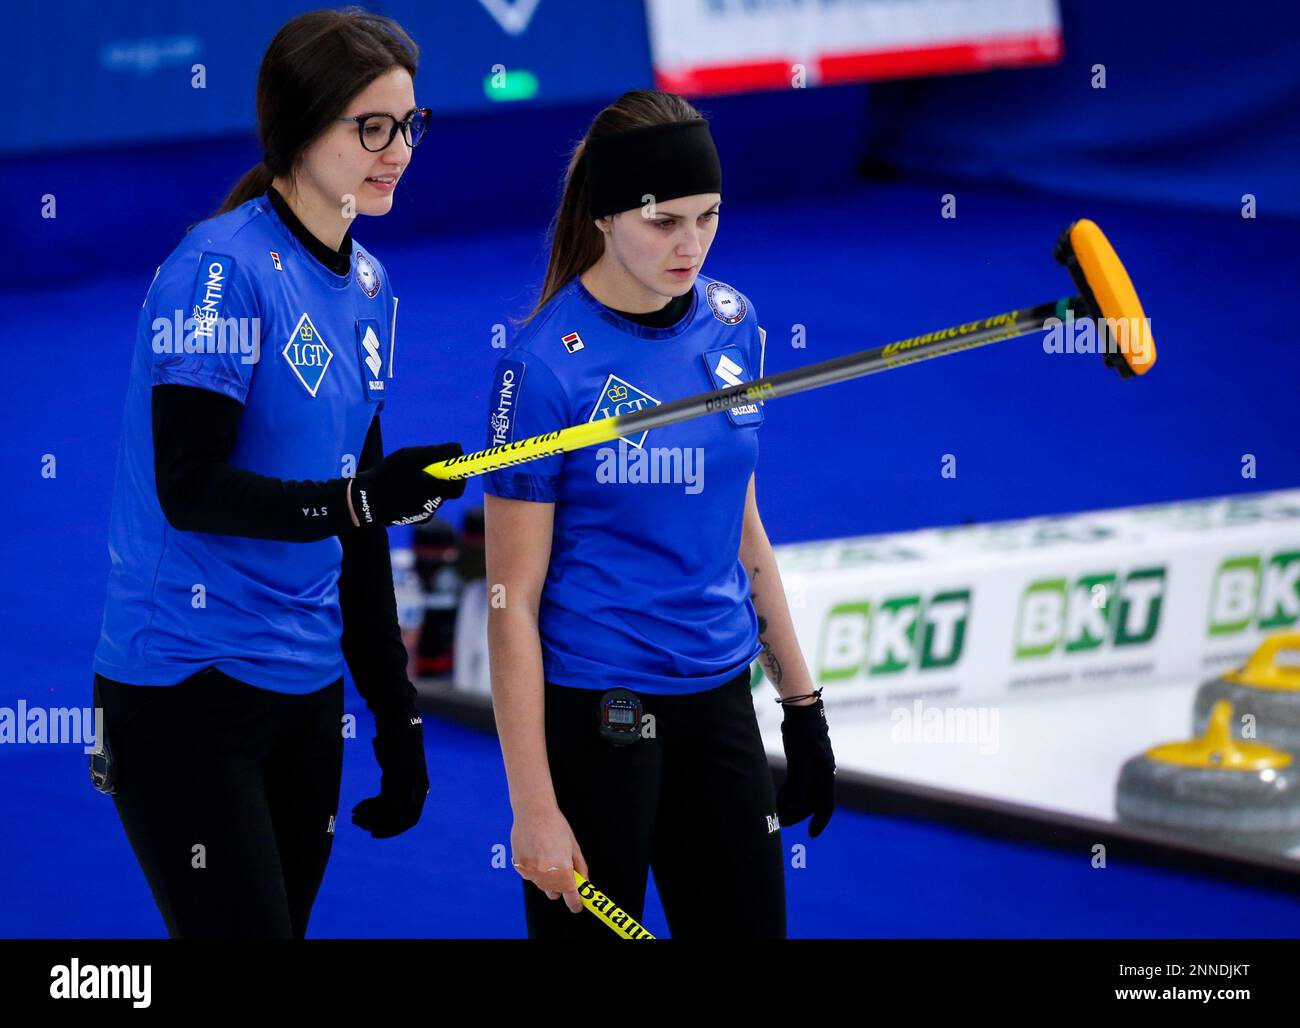 Italy skip Stefania Constantini, left, and third Marta Lo Deserto discuss strategy against Canada at the womens world curling championship in Calgary, Alberta, Tuesday, May 4, 2021